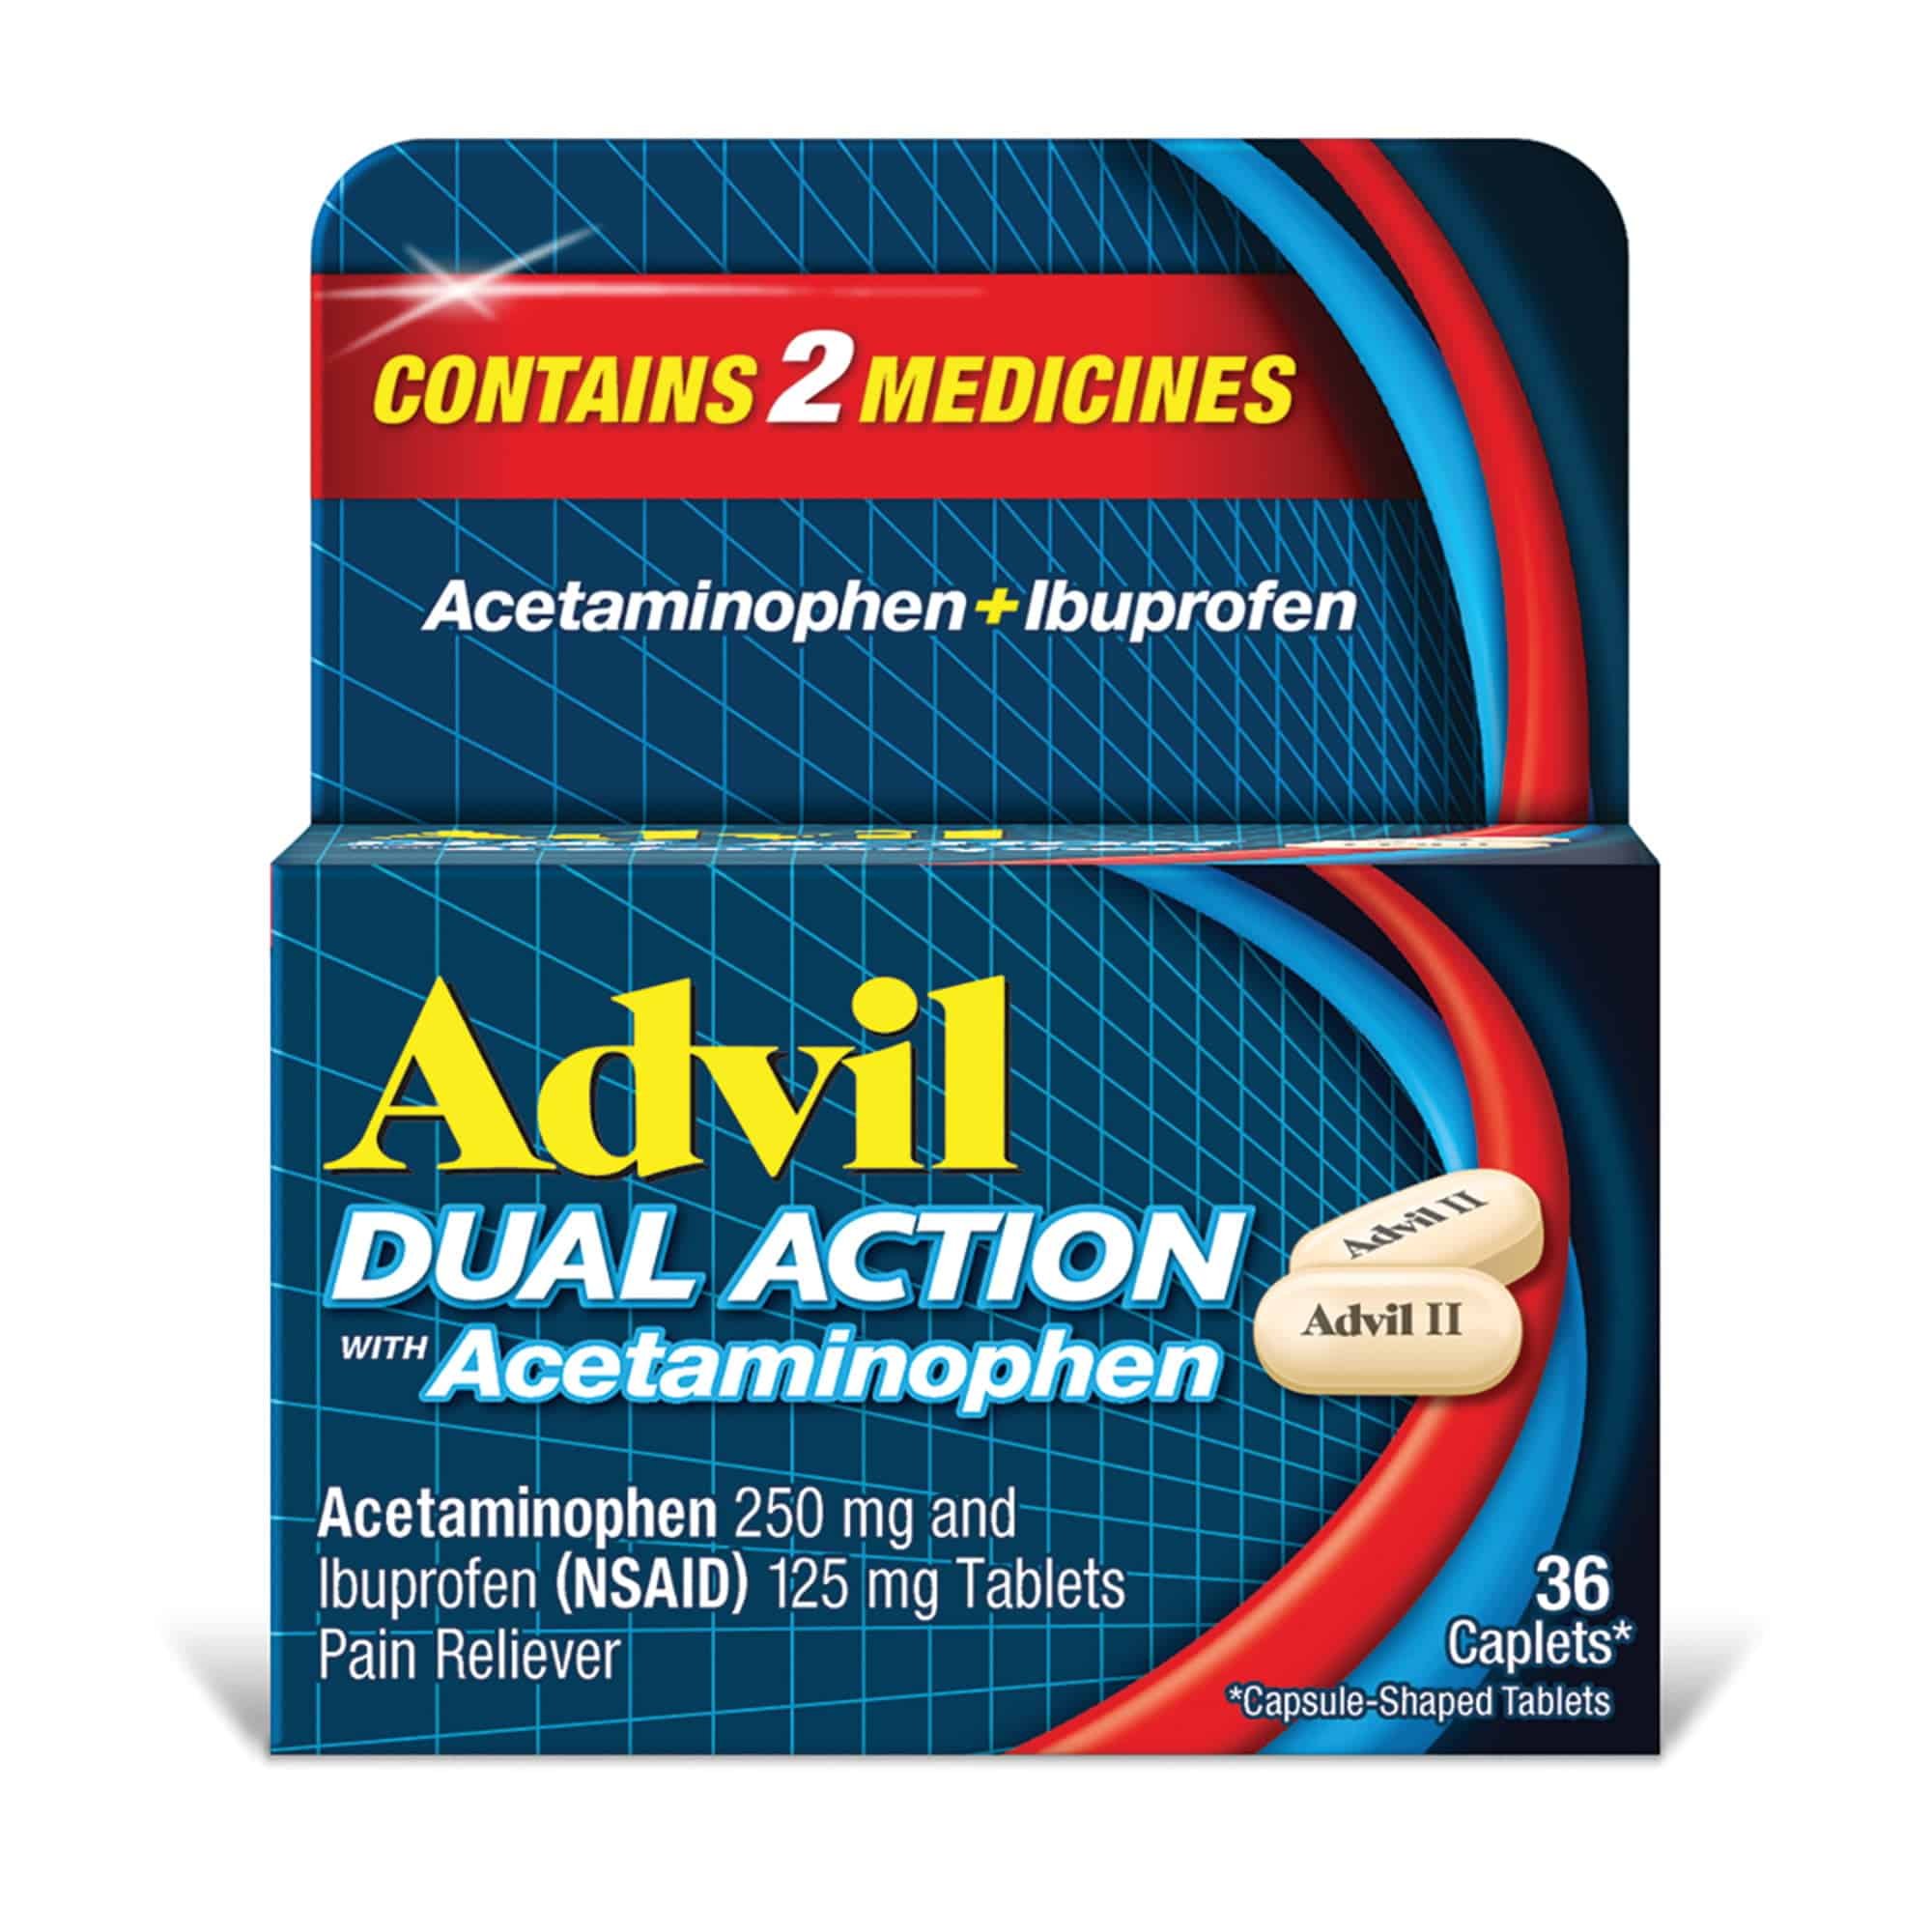 [discussion] Tylenol or Advil? Who is the main OTC girl?